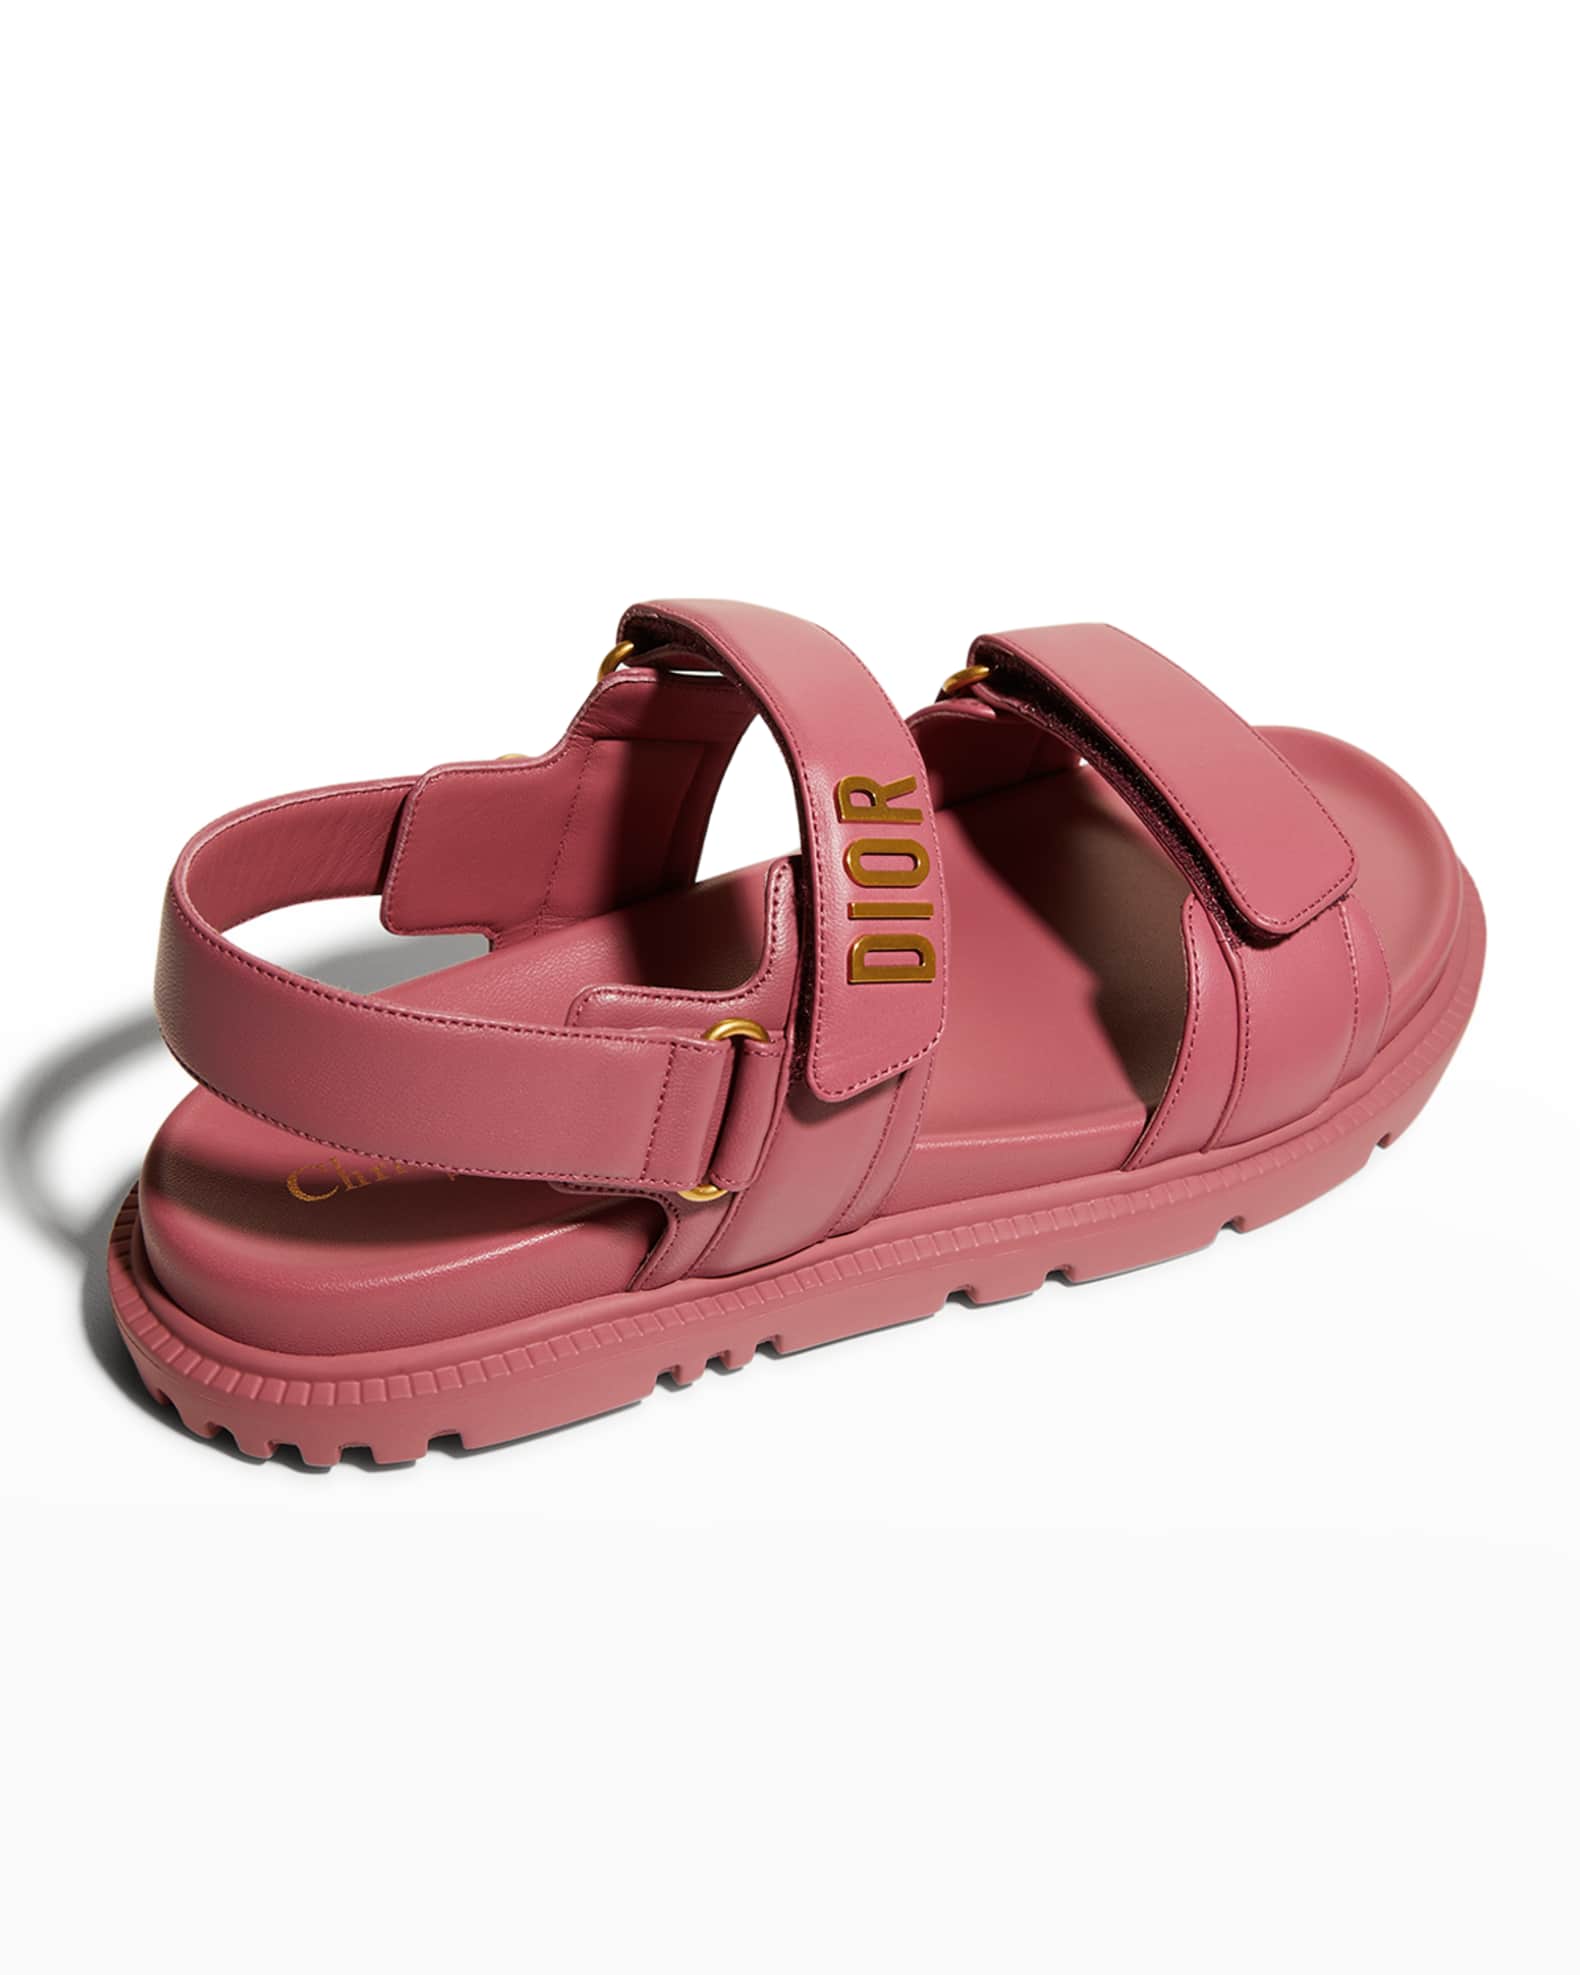 Dior 10MM DIORACT LEATHER SANDAL